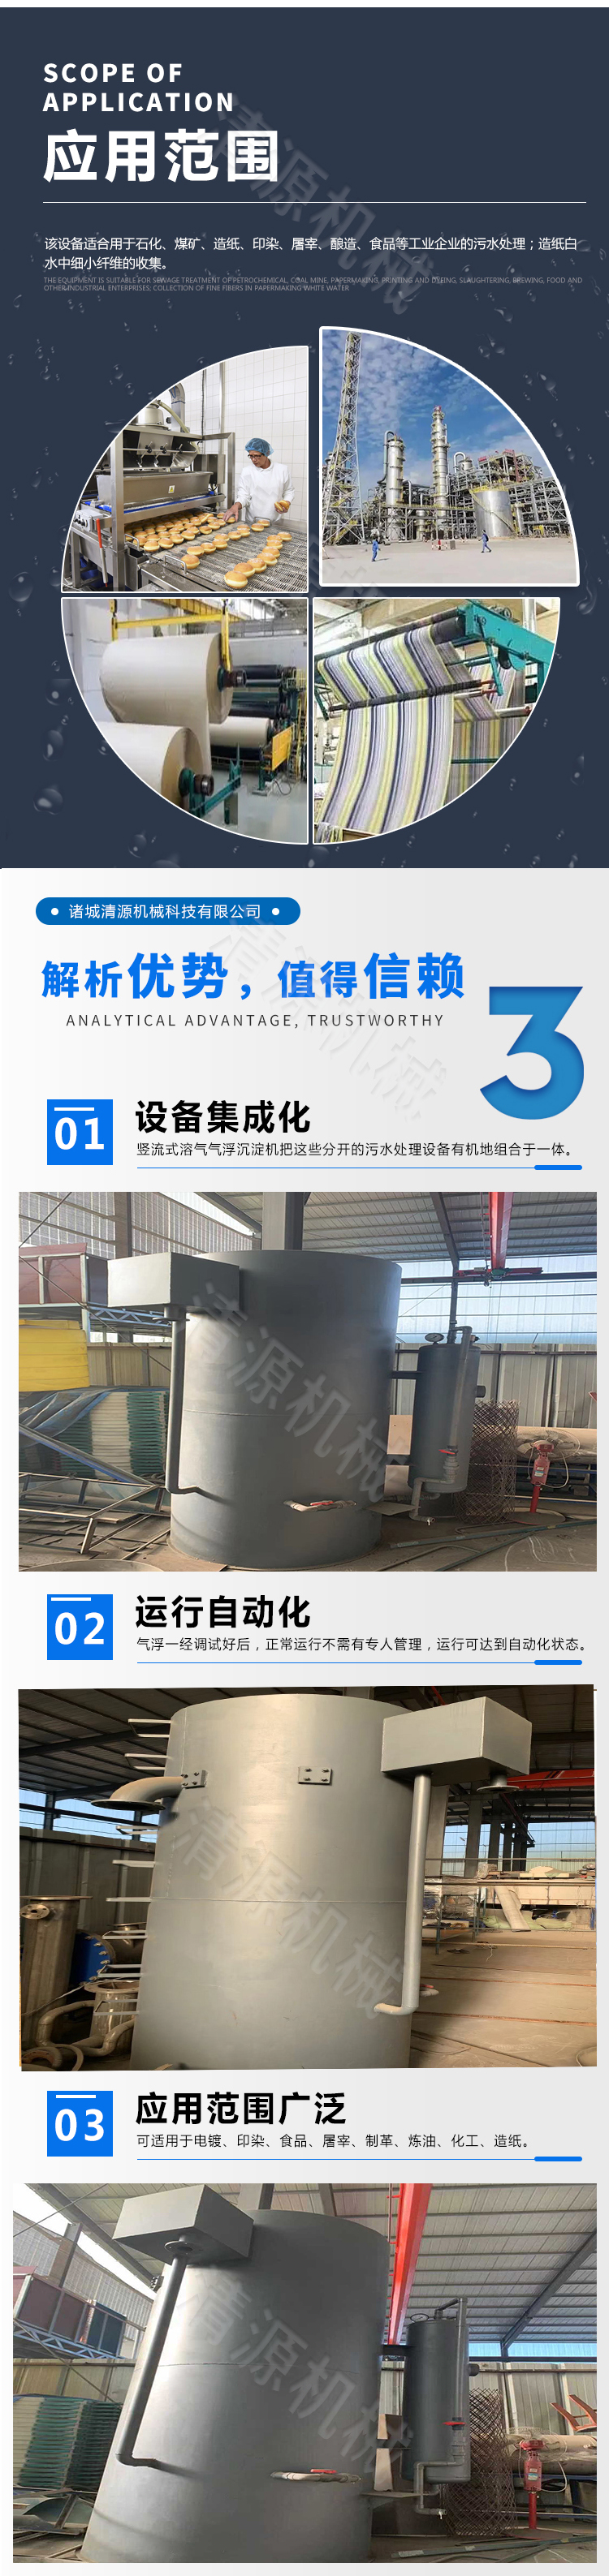 Qingyuan Vertical Flow Dissolved Air Floatation Machine Paper Making and Food Sewage Treatment Equipment Effluent Operation Meets Discharge Standards